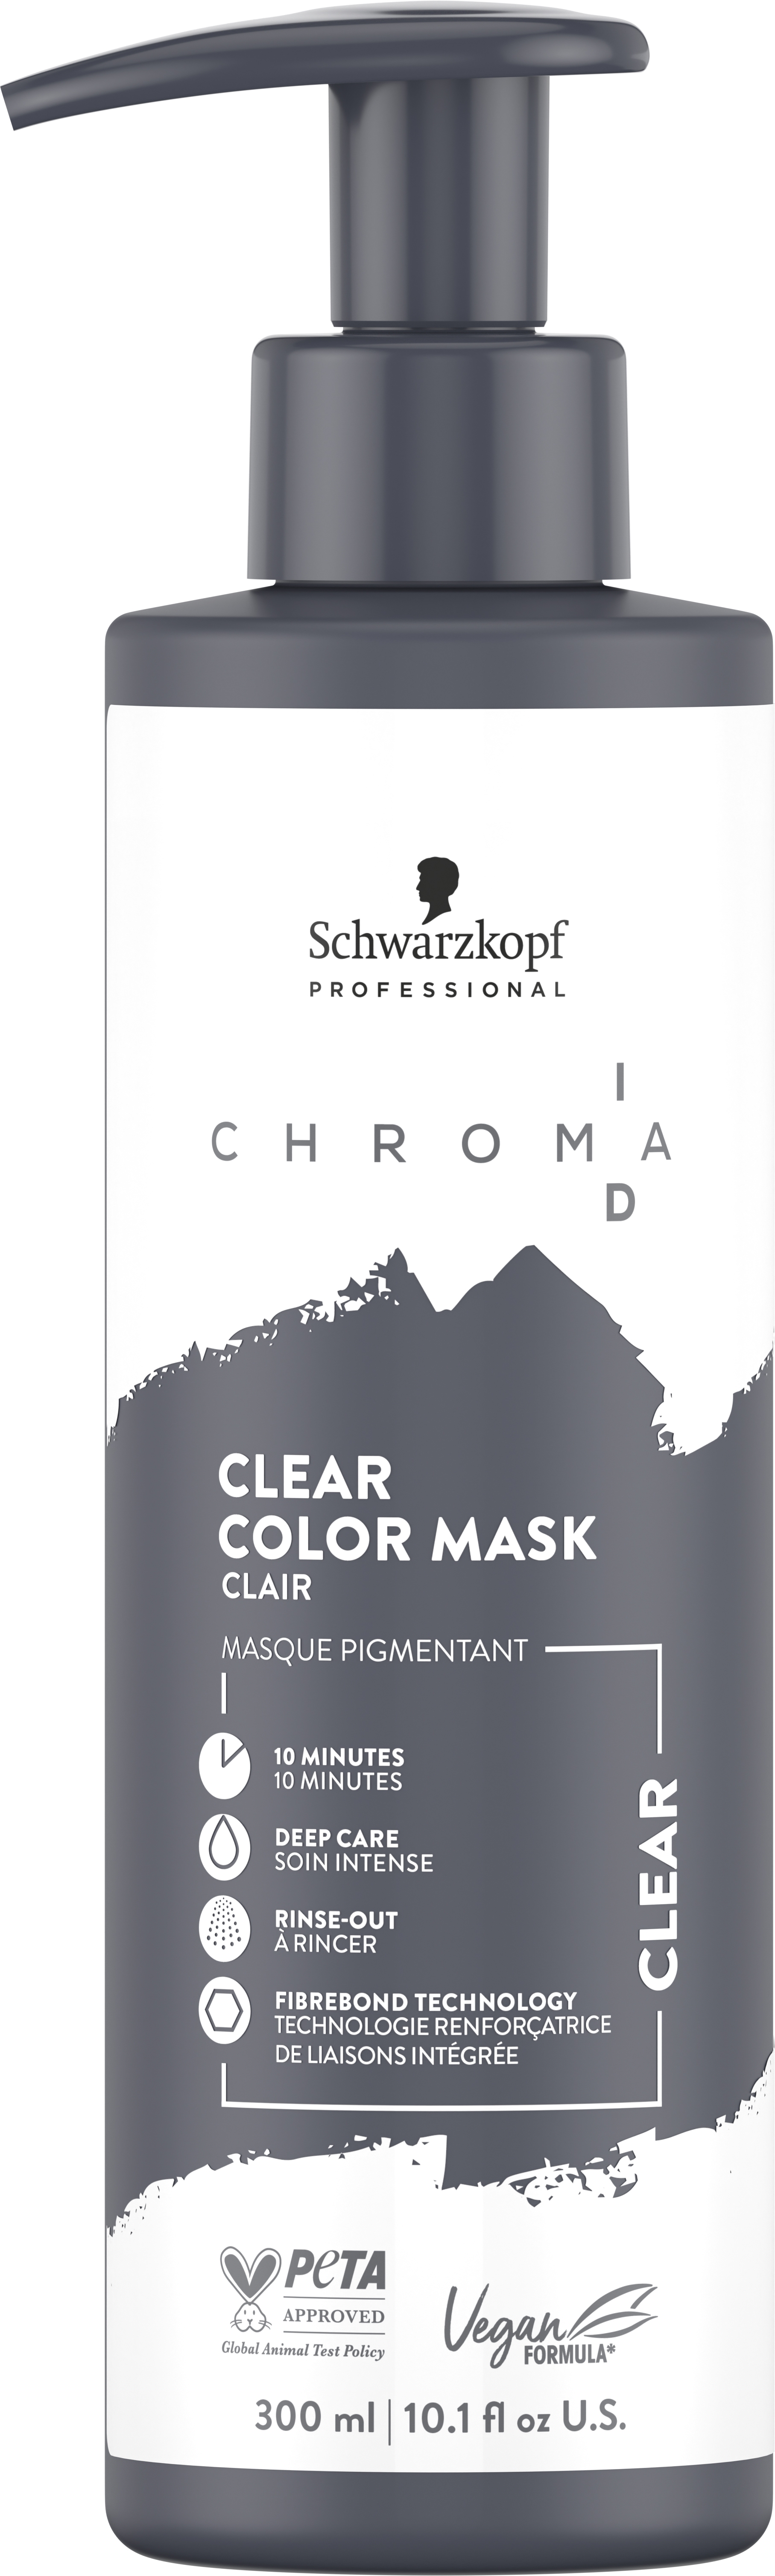 Product image from Chroma ID - Bonding Color Mask Clear